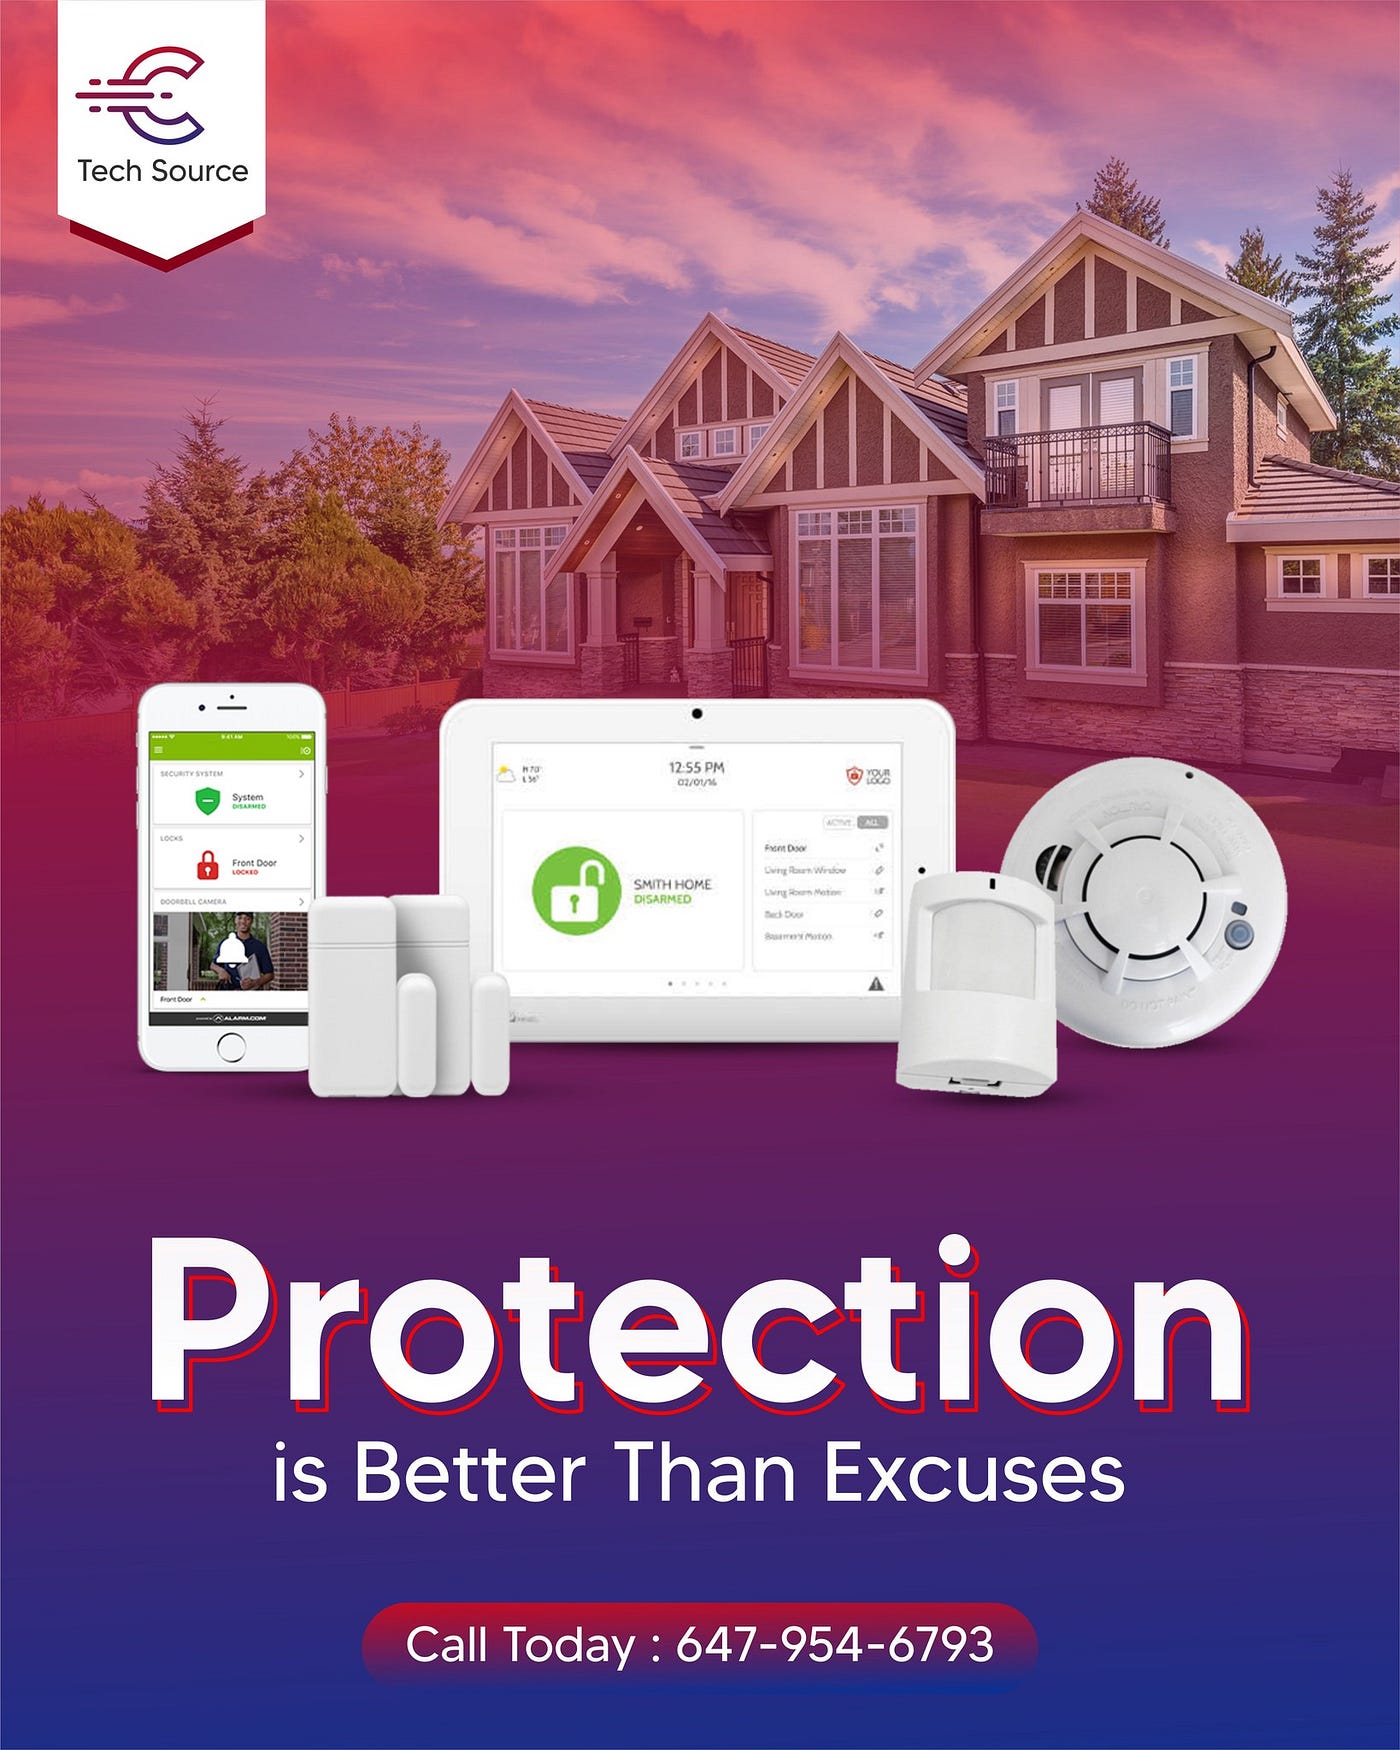 Smart Home Alarm in Calgary. C-Tech Source: Elevate Your Security… | by  C-Tech Source | Medium